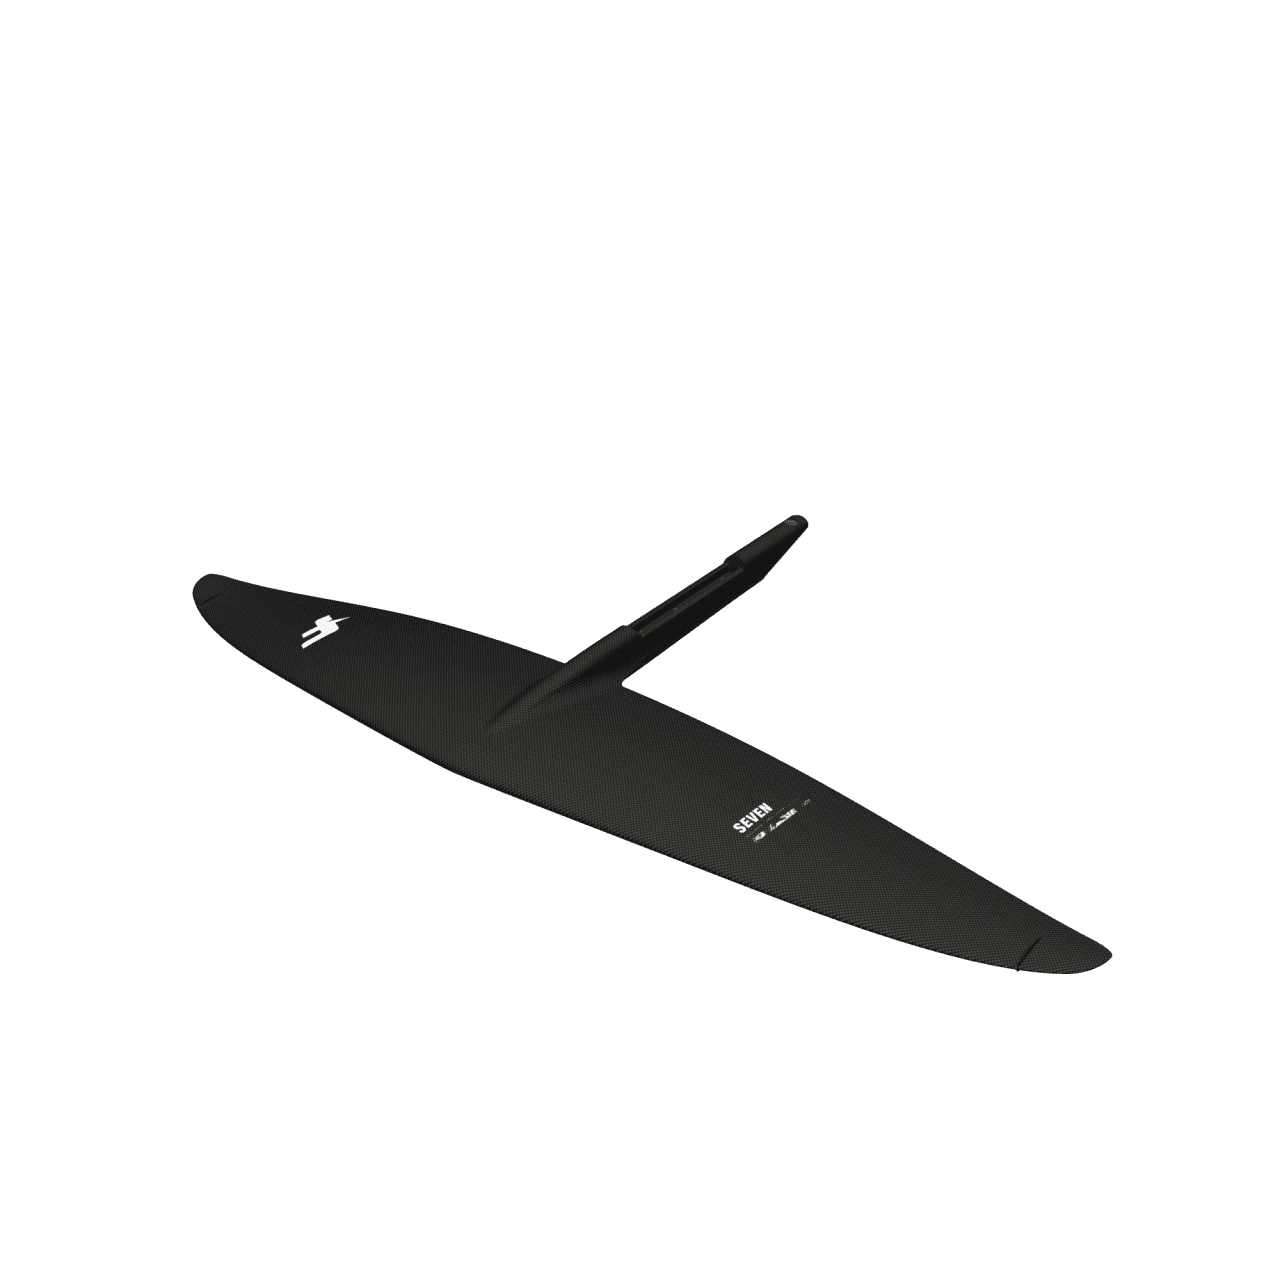 2023 F-One Plane Seven Seas Carbon Carbon 1200 Foil Kit (Front wing, tail wing, fuselage, hardware)